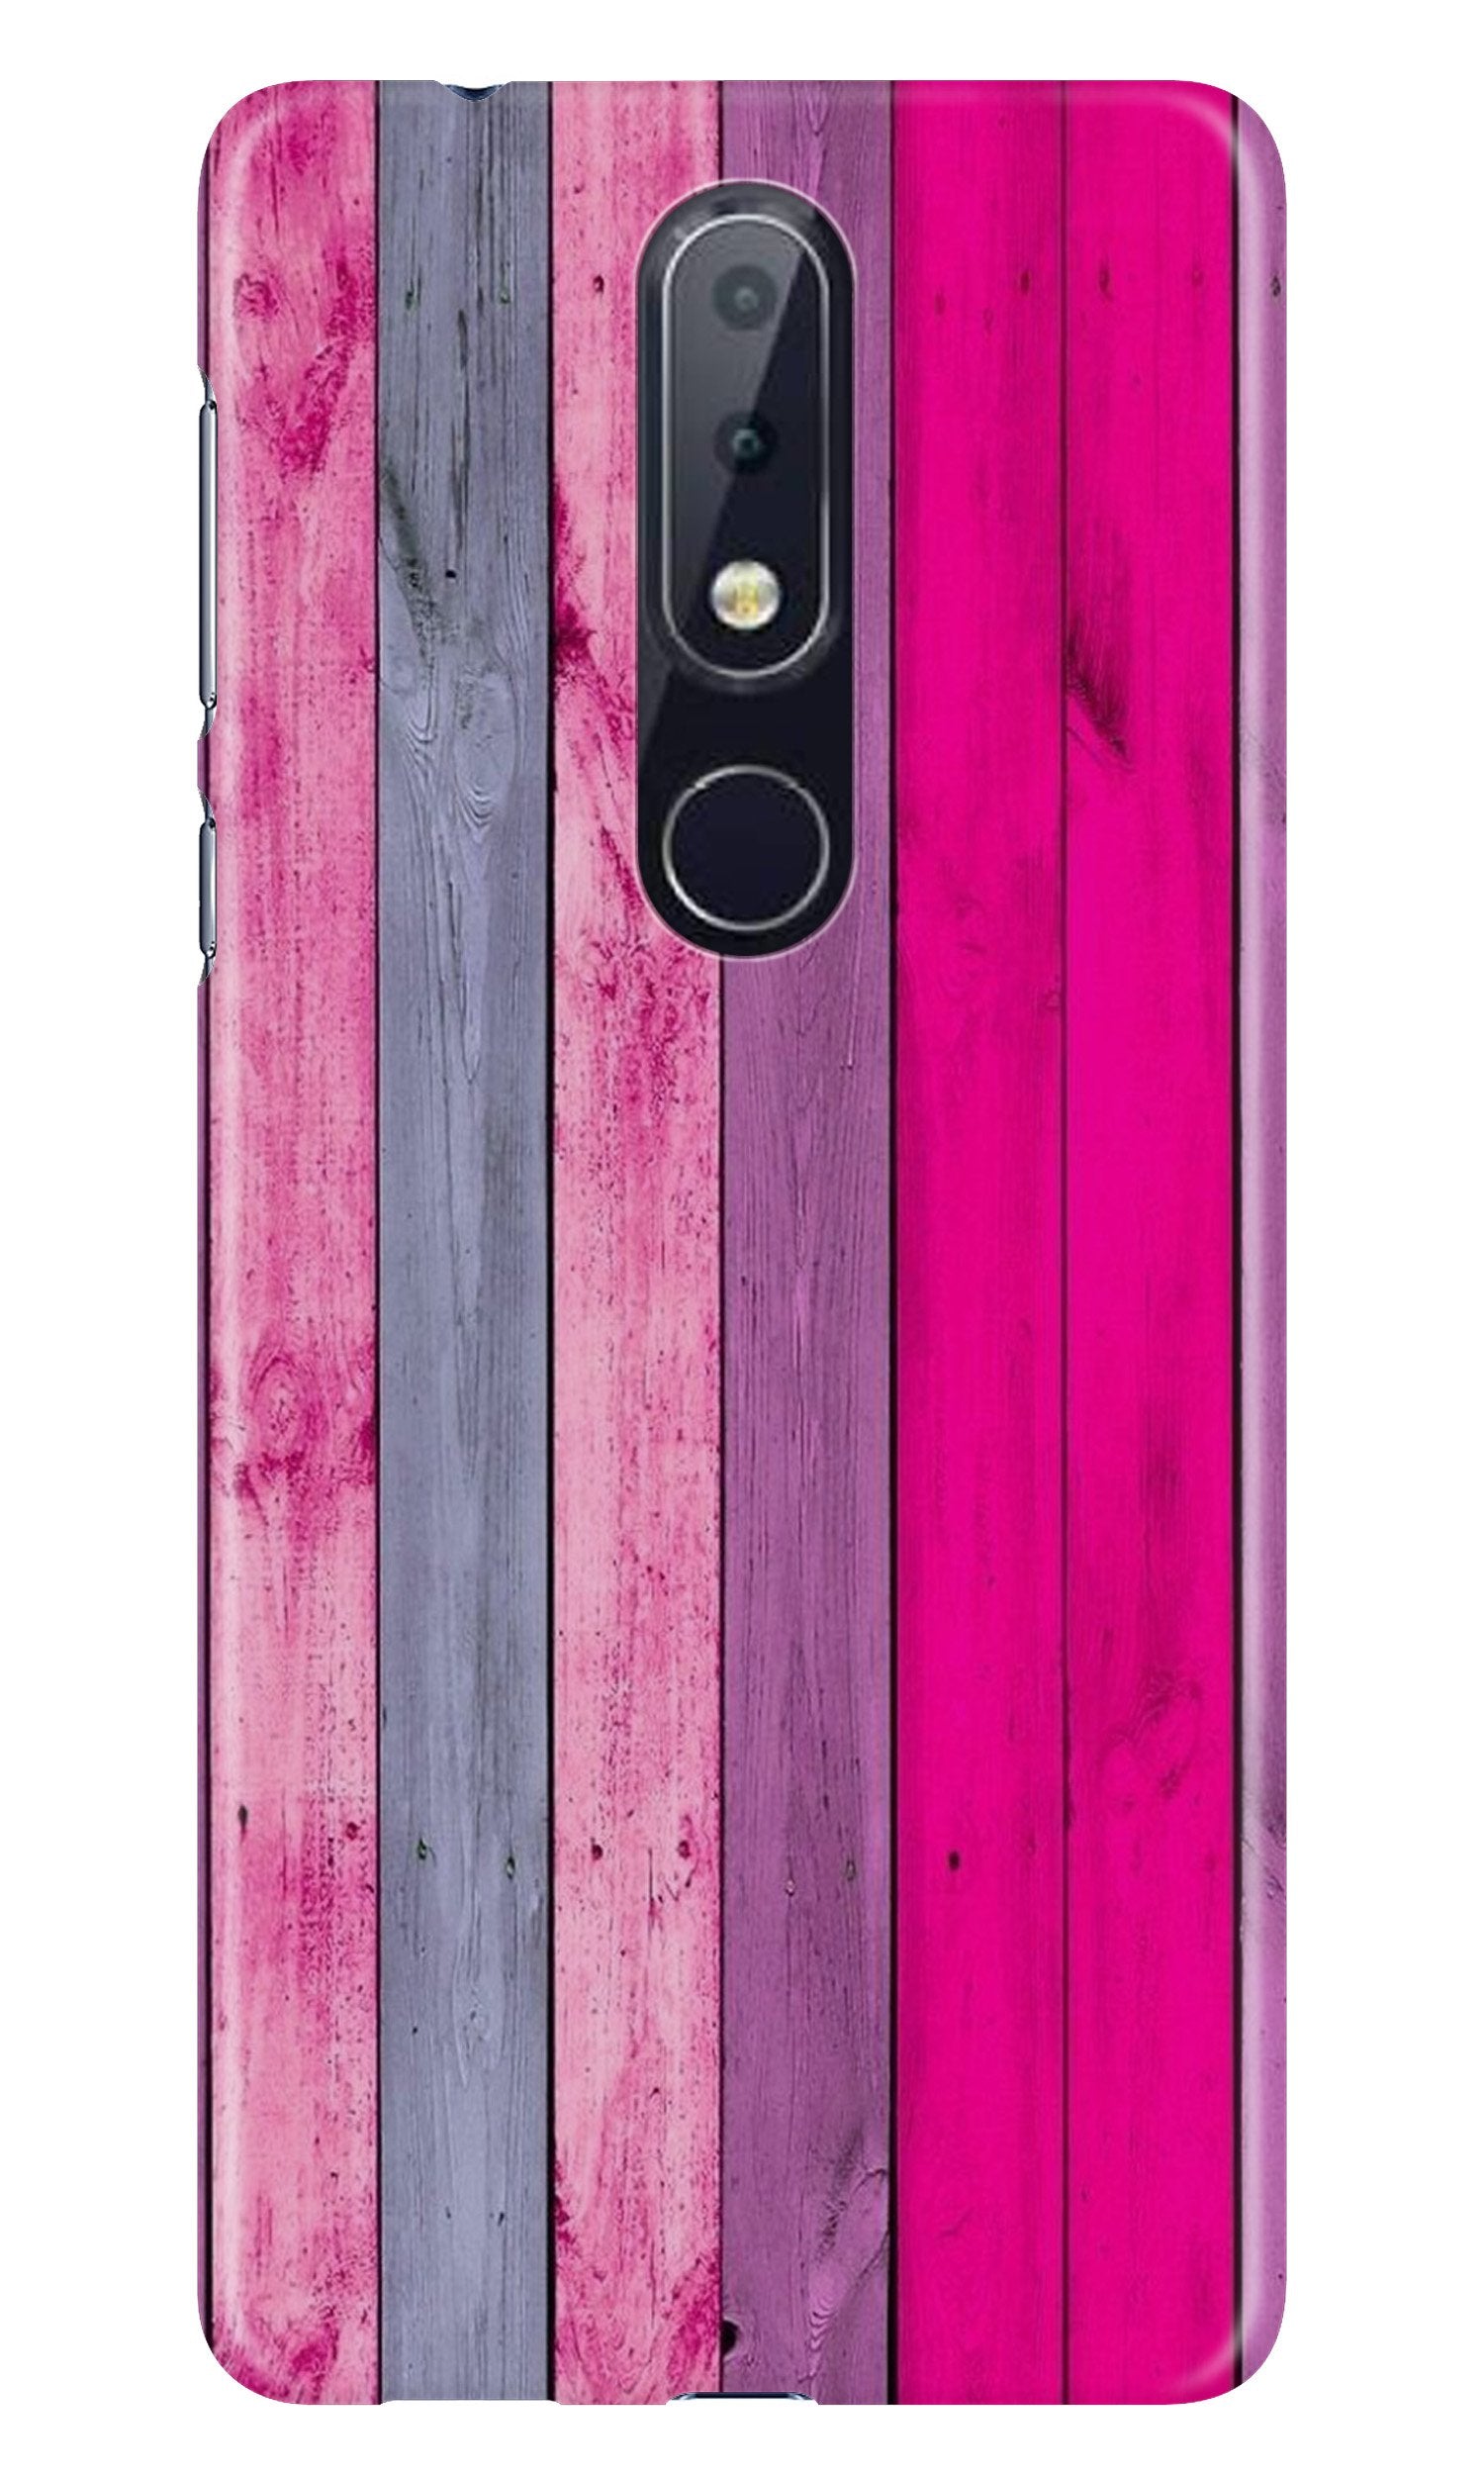 Wooden look Case for Nokia 4.2